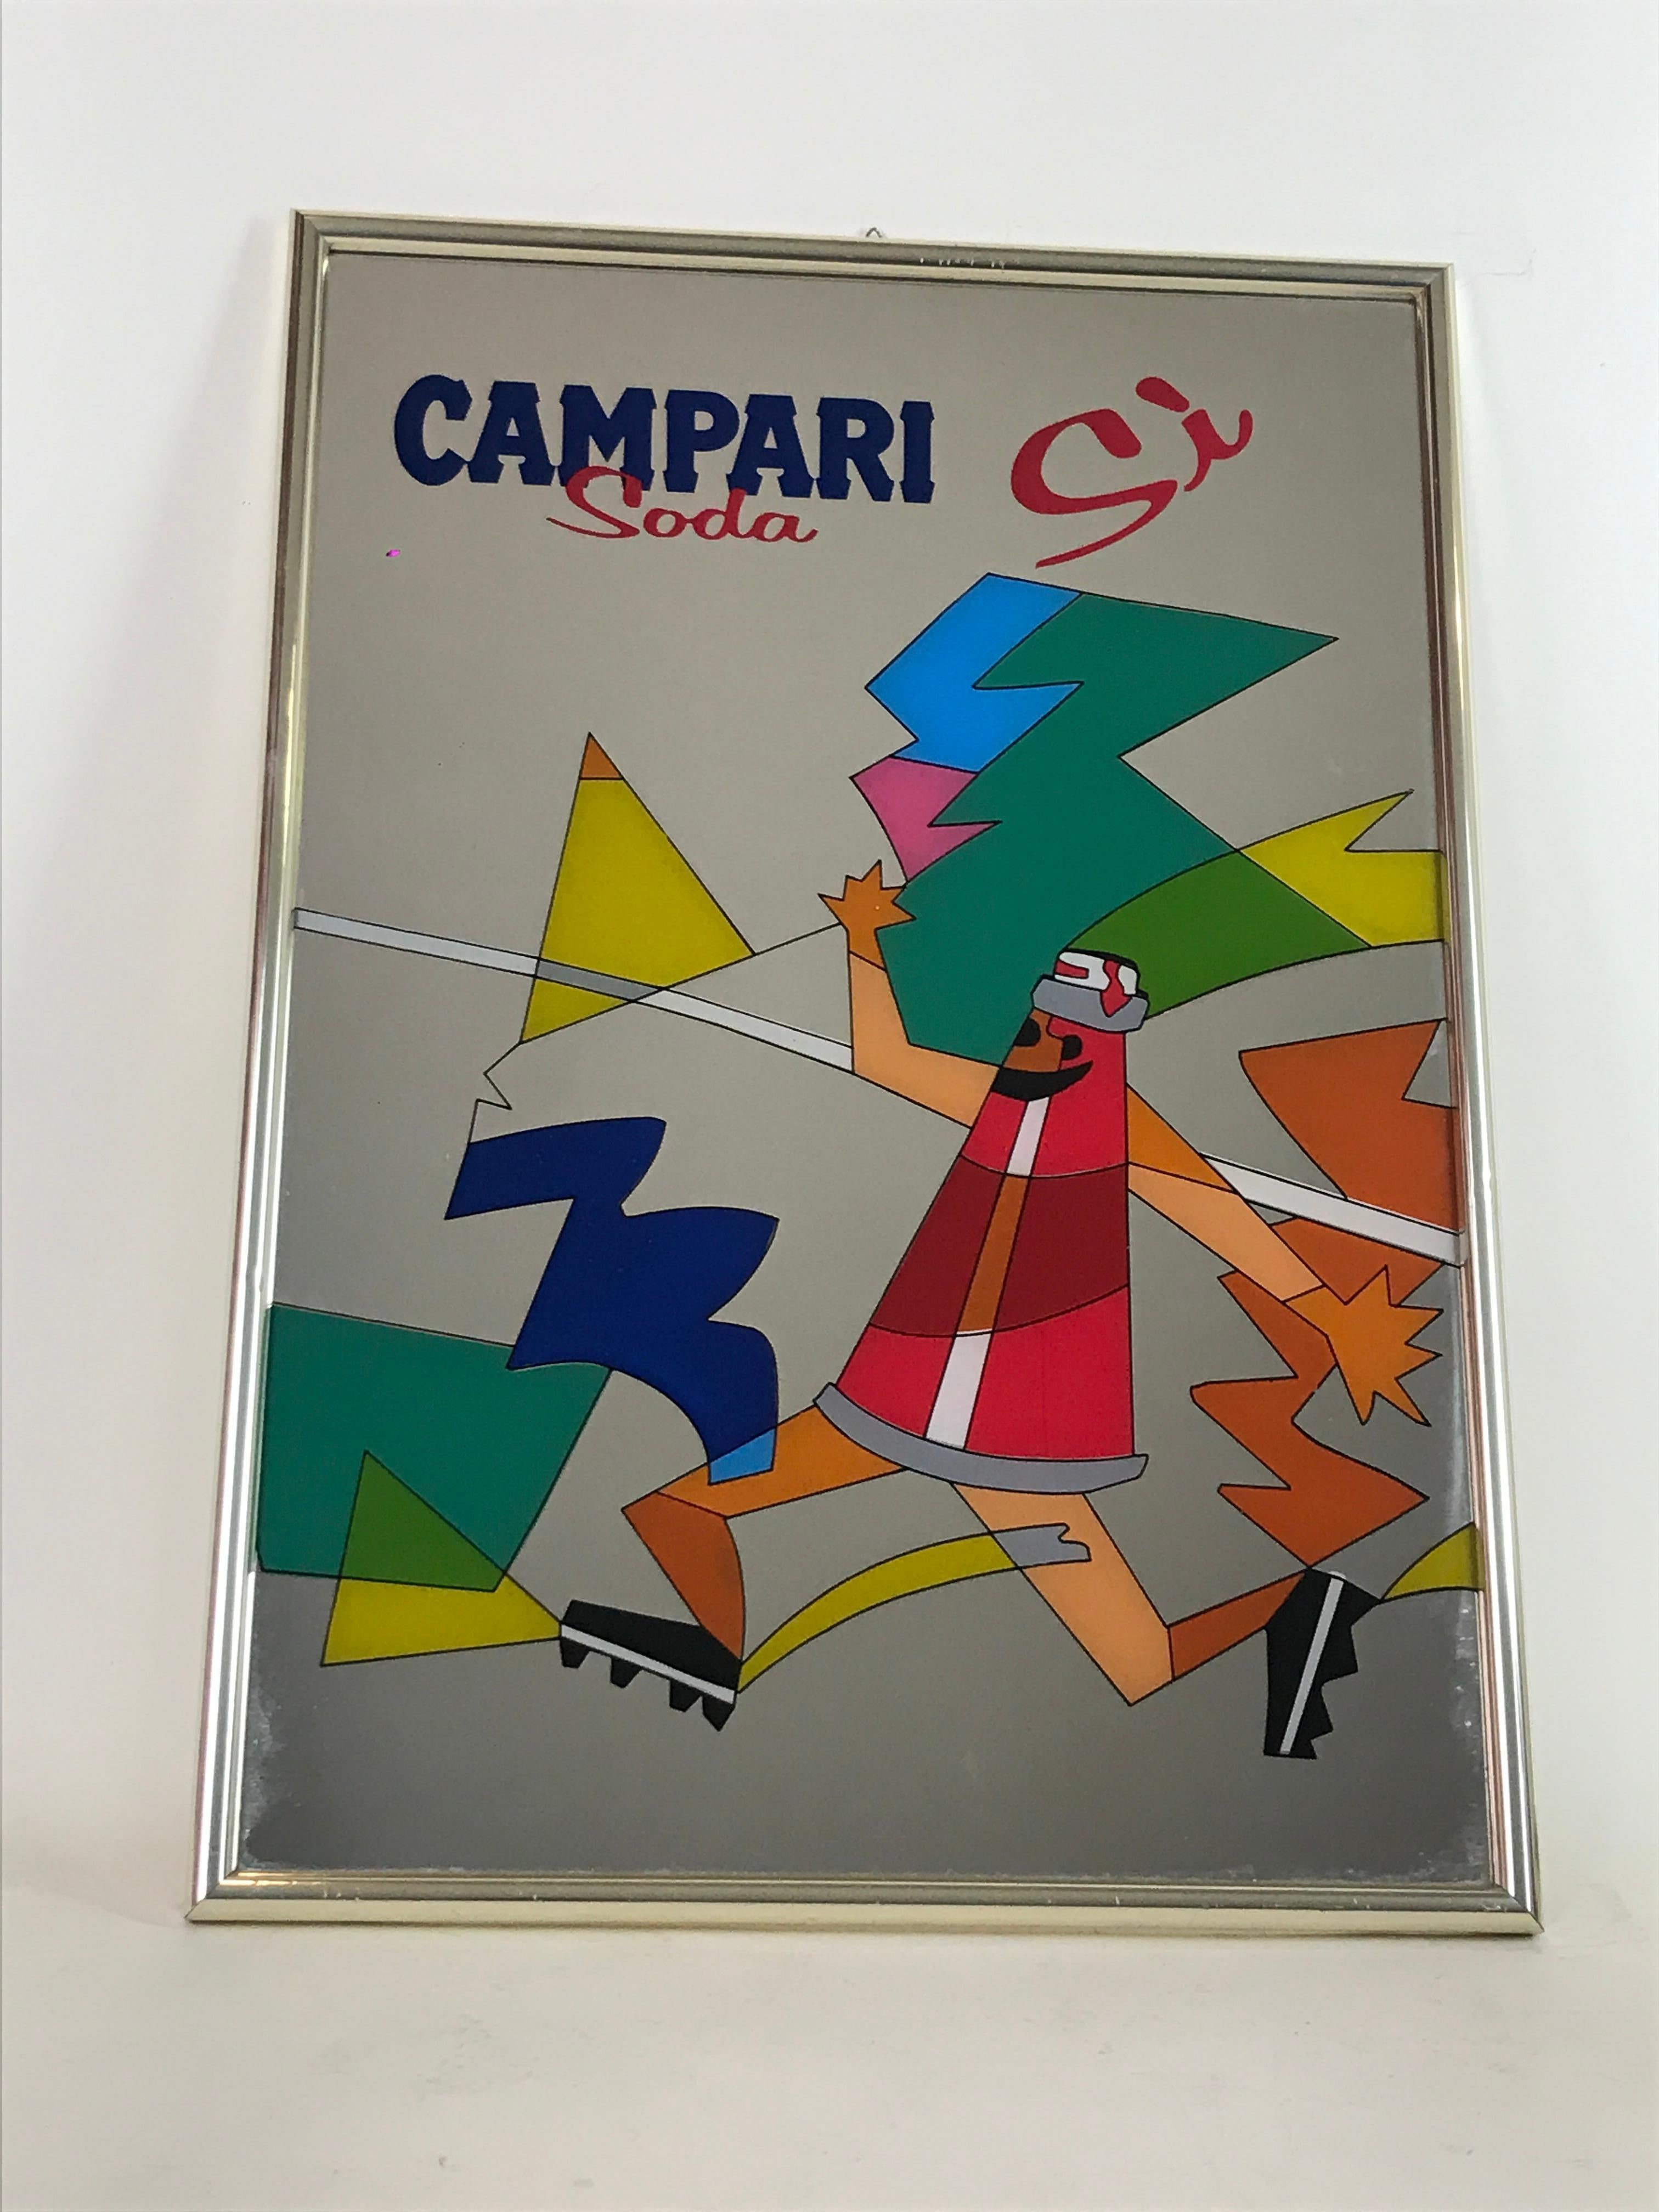 1980s Vintage Wall Mirror Advertising Campari Soda Sì Made in Italy In Good Condition For Sale In Milan, IT